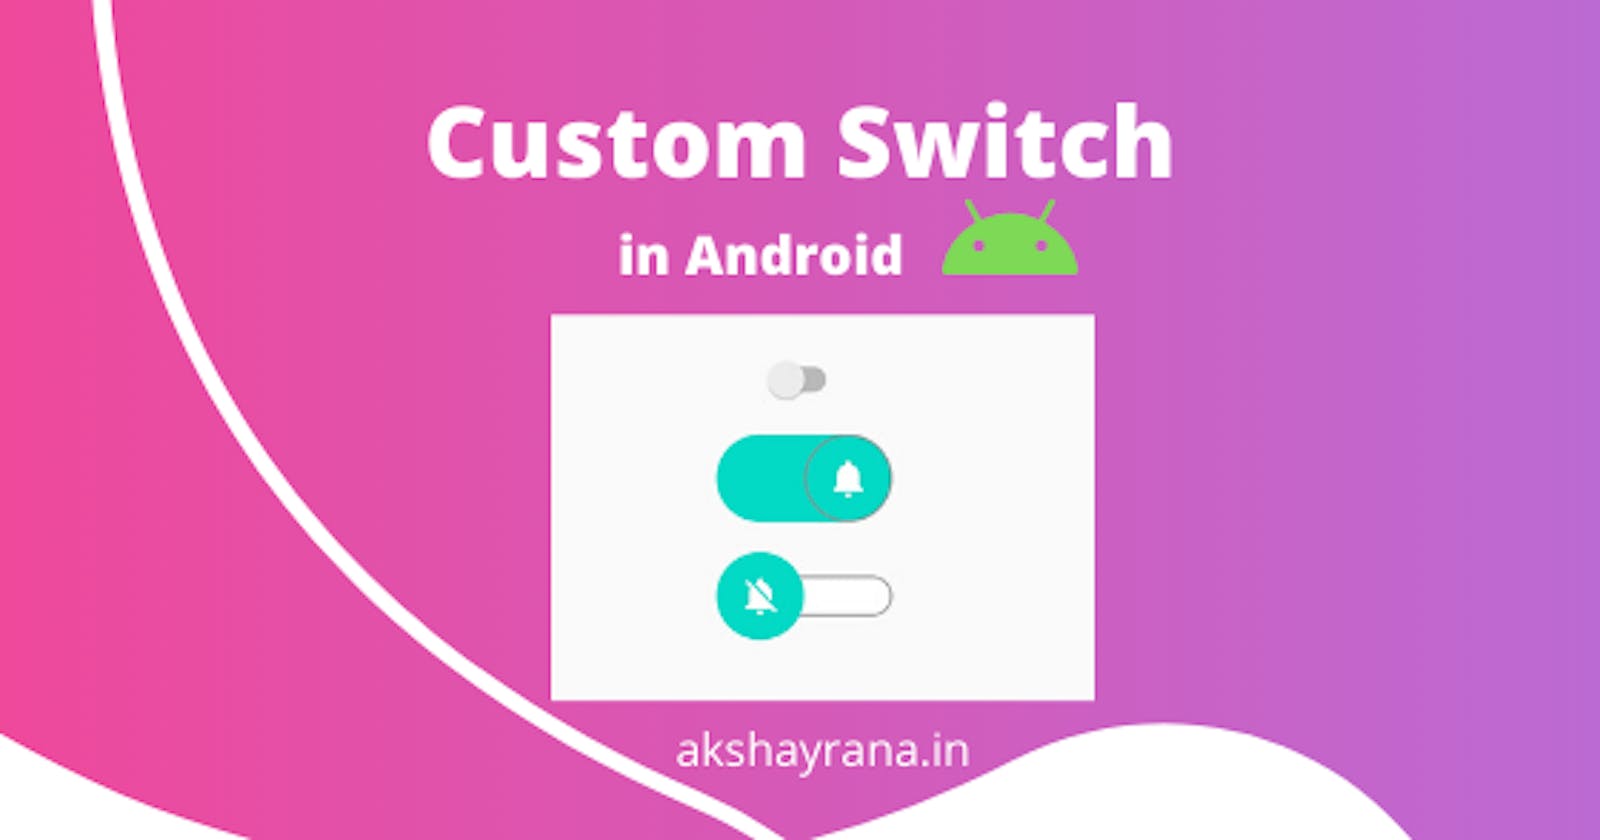 How to make Custom Switch in Android?